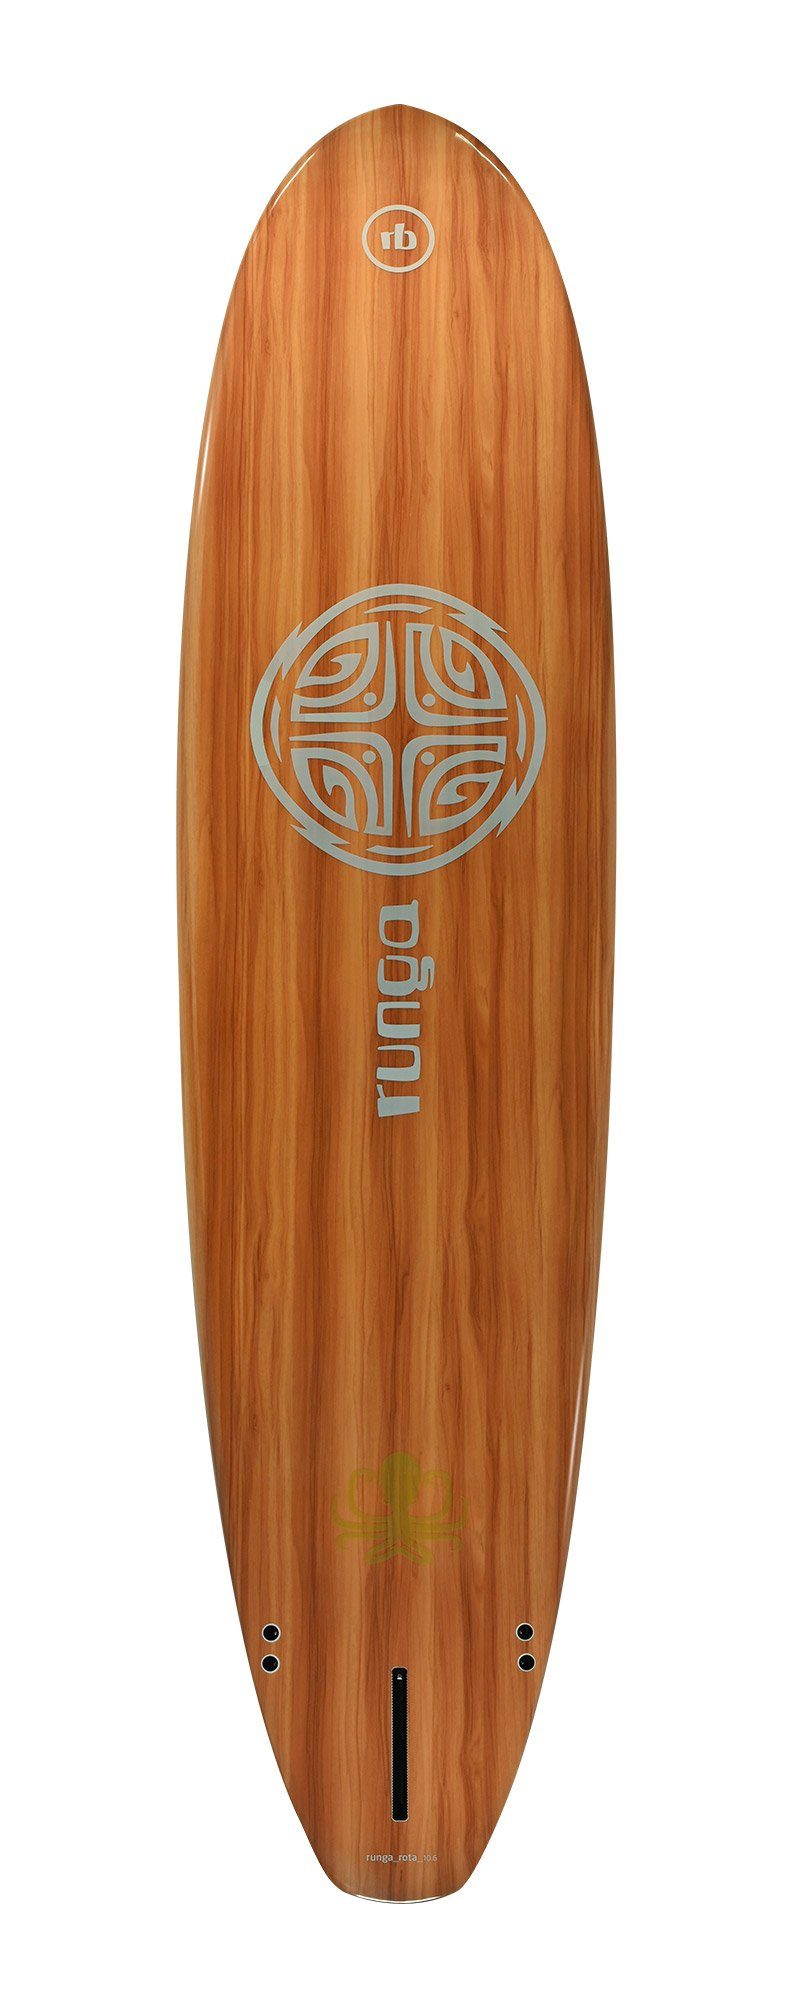 coiled YELLOW Runga-Boards Up Stand SUP, Paddling Board & Finnen-Set) (Set leash ROTA Allrounder, SUP-Board 10.6, Hard 3-tlg. Inkl.